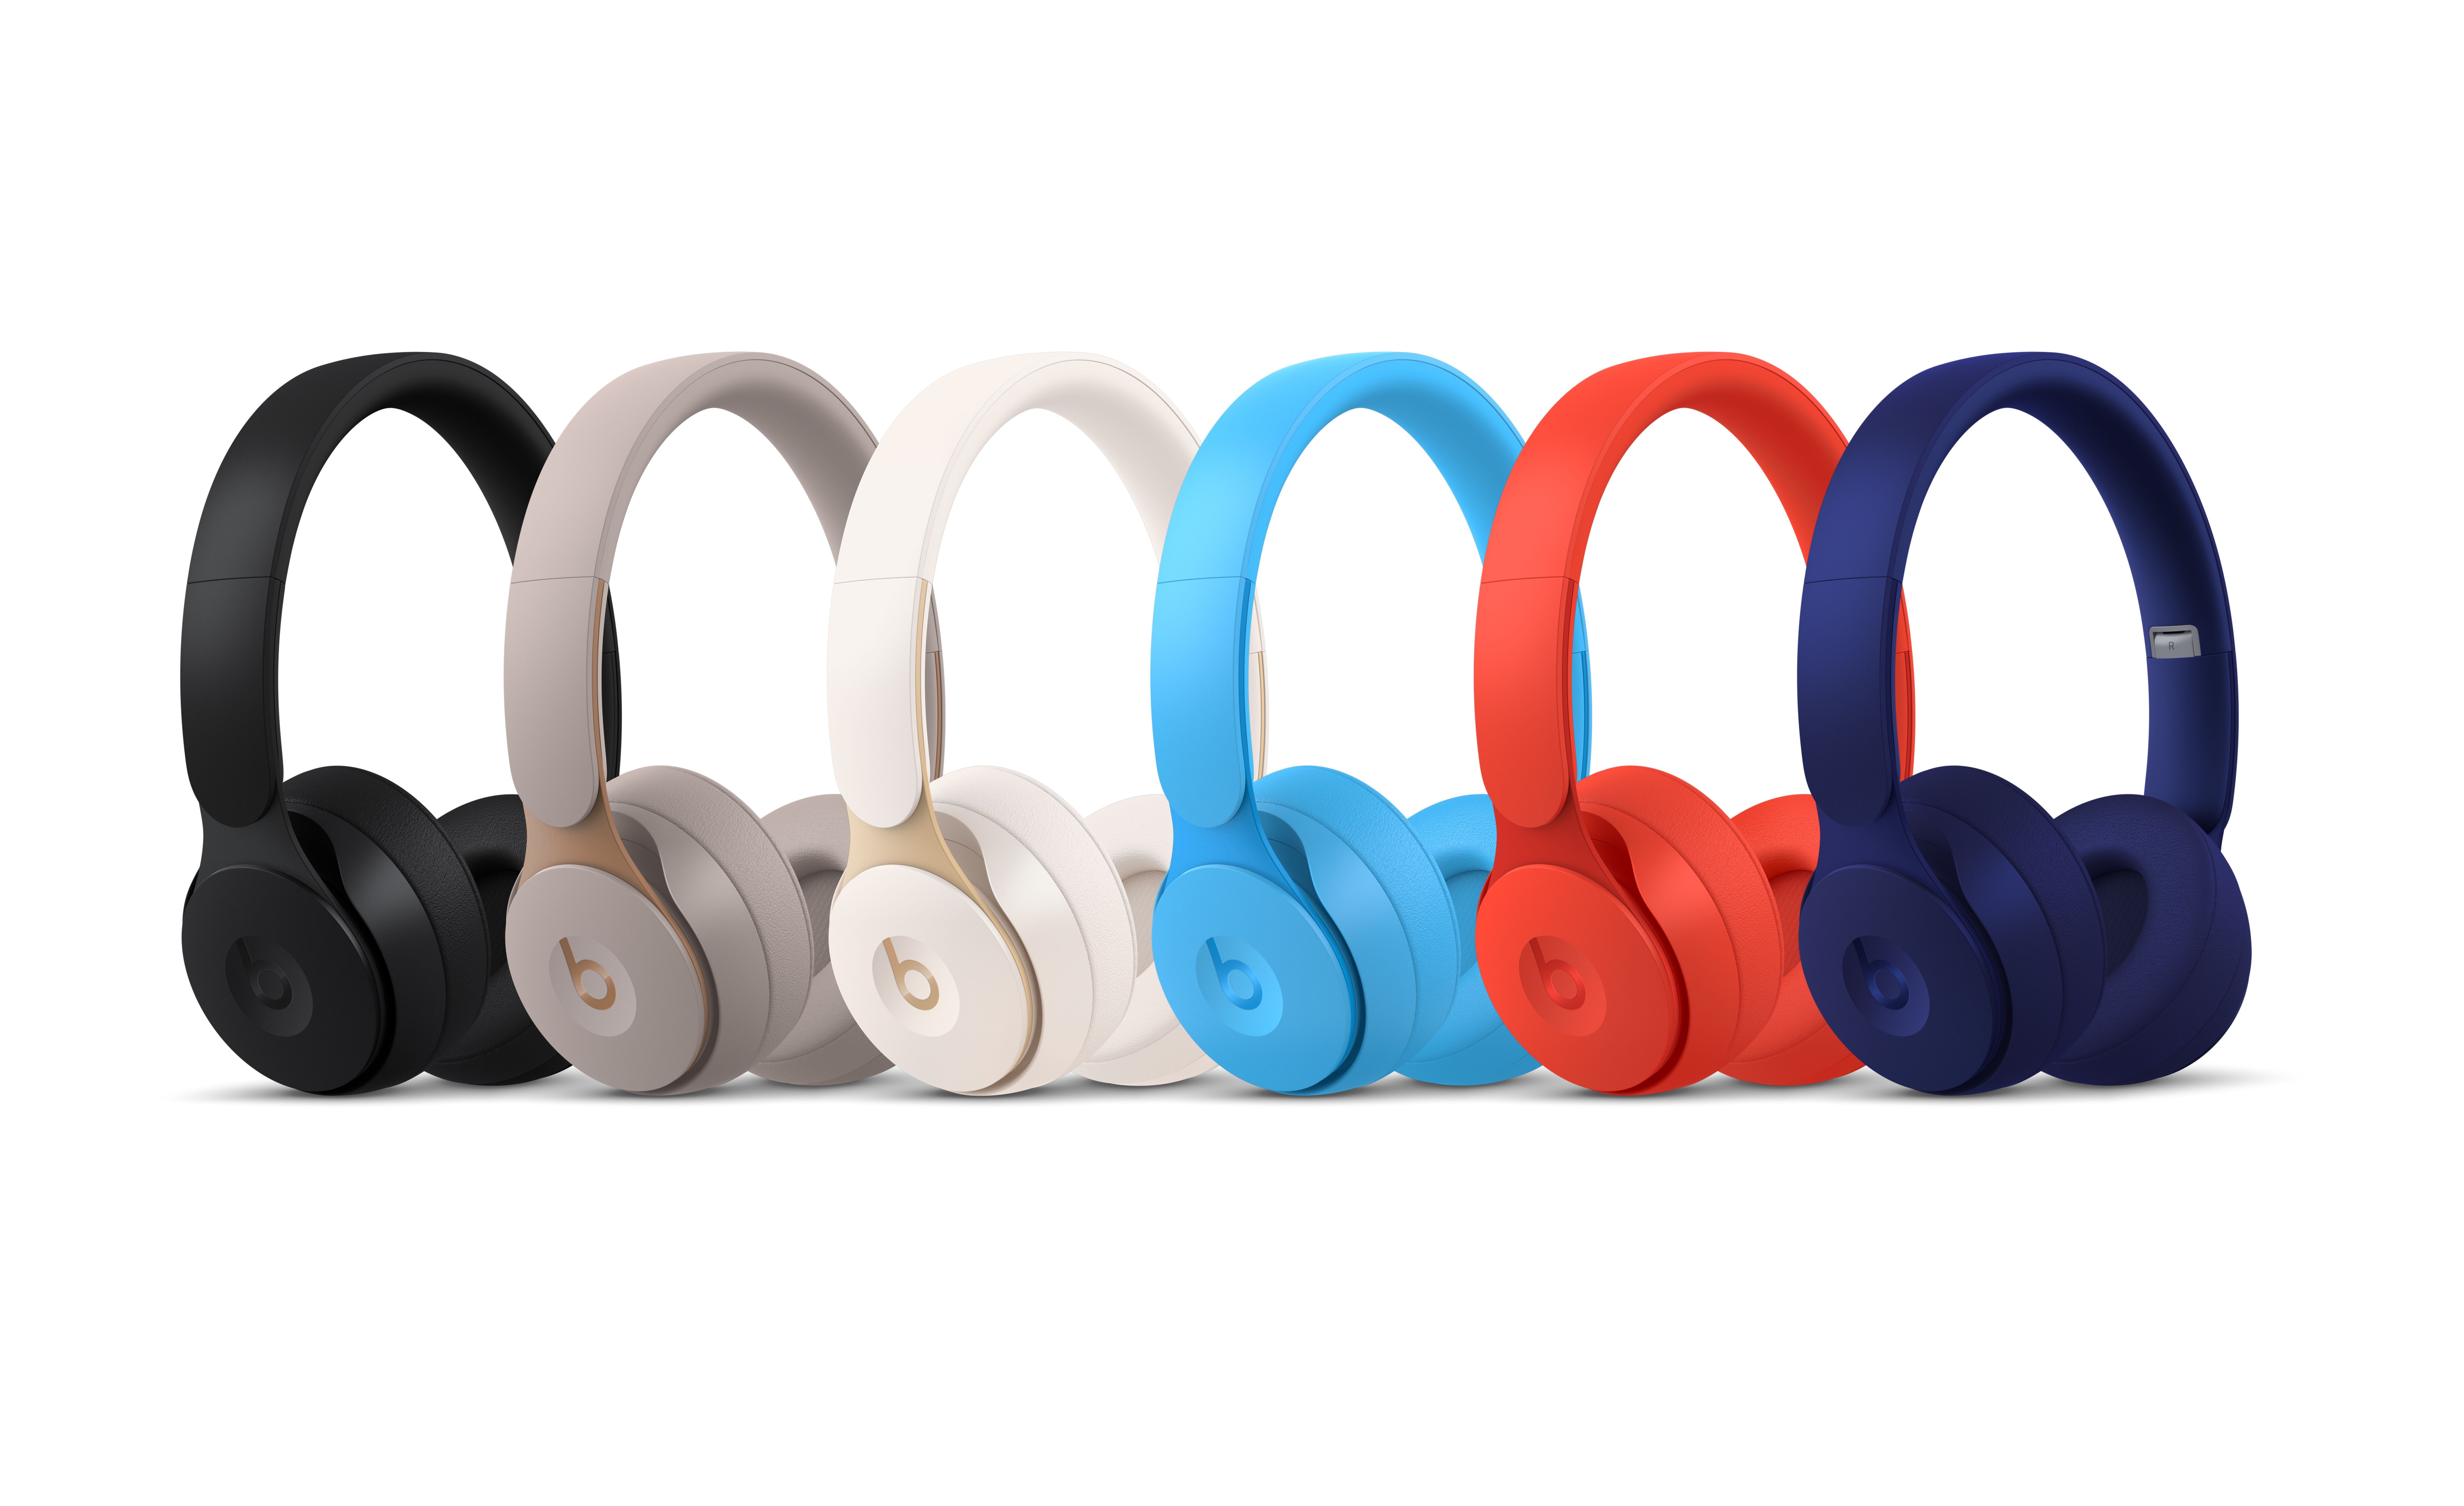 New Beats Solo Pro Headphones Featuring Apple's H1 Chip Are